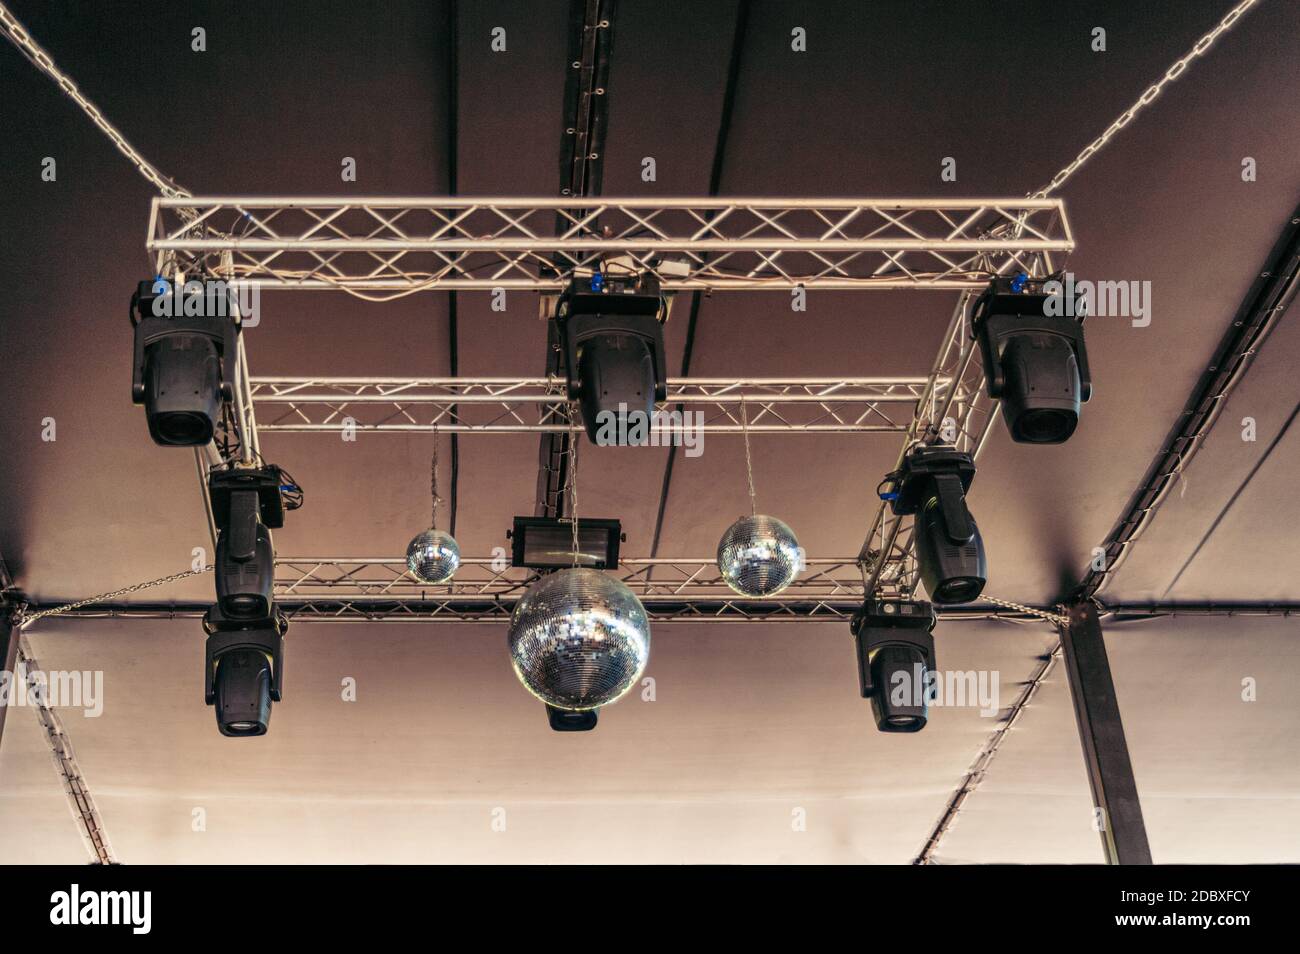 Several disco balls and strobe lights hang from the ceiling of the nightclub Stock Photo